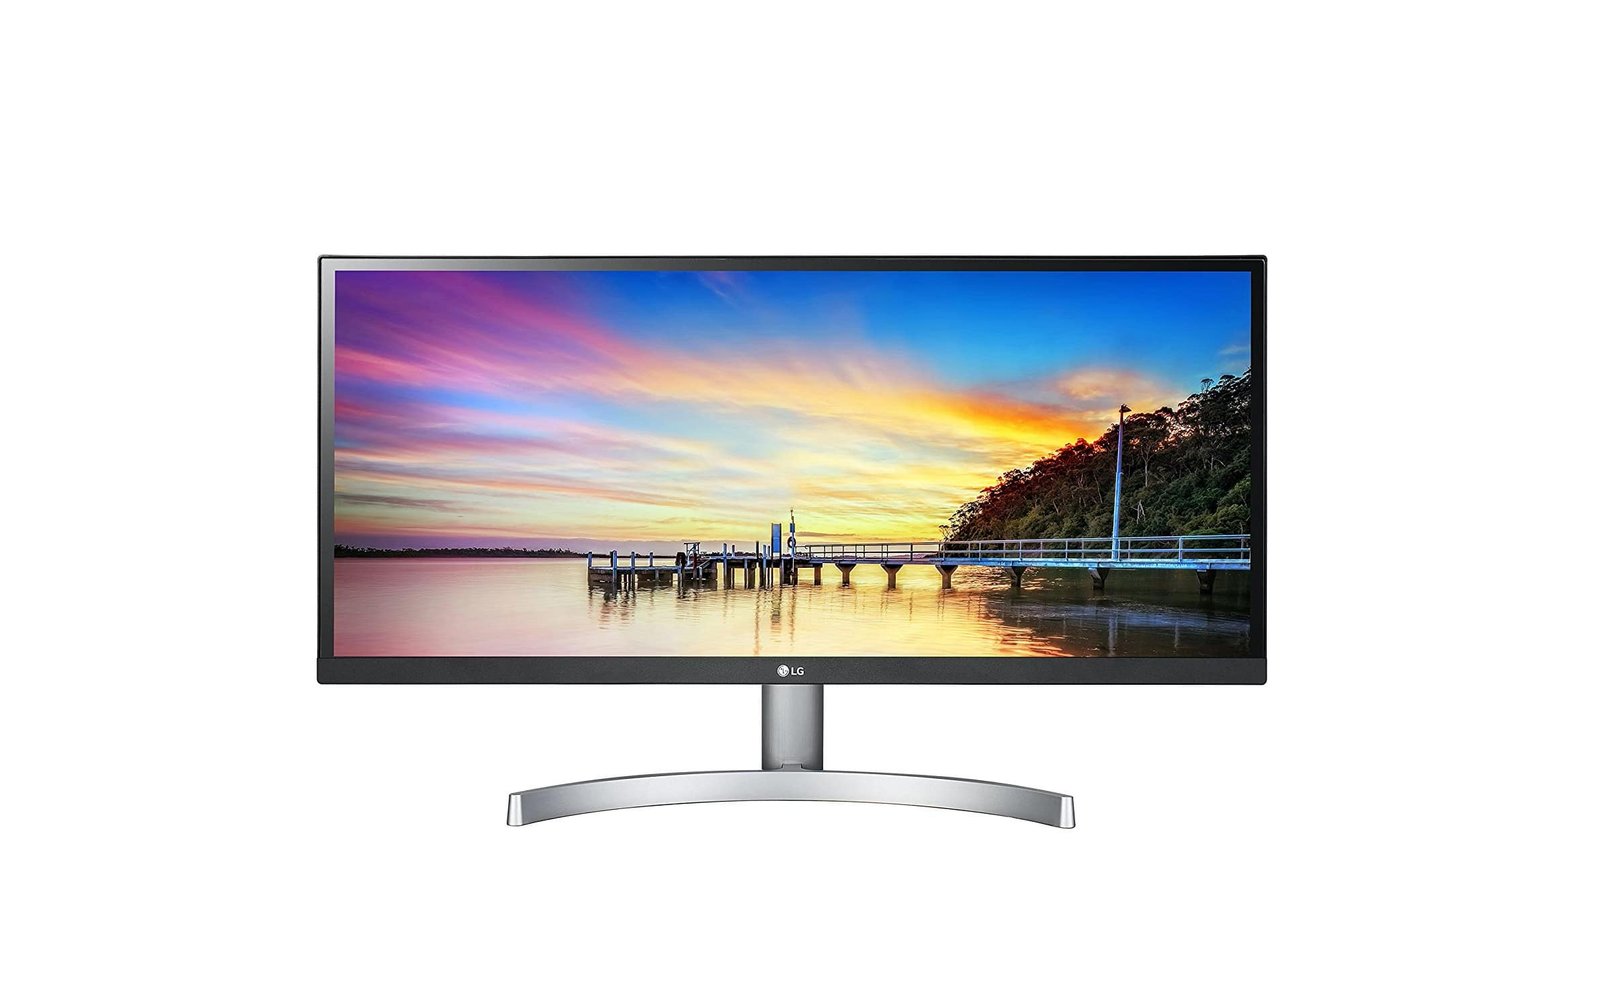 LG 29WK600-W 29 UltraWide 21-9 IPS Monitor with HDR10 and FreeSync (2018) -min (1)